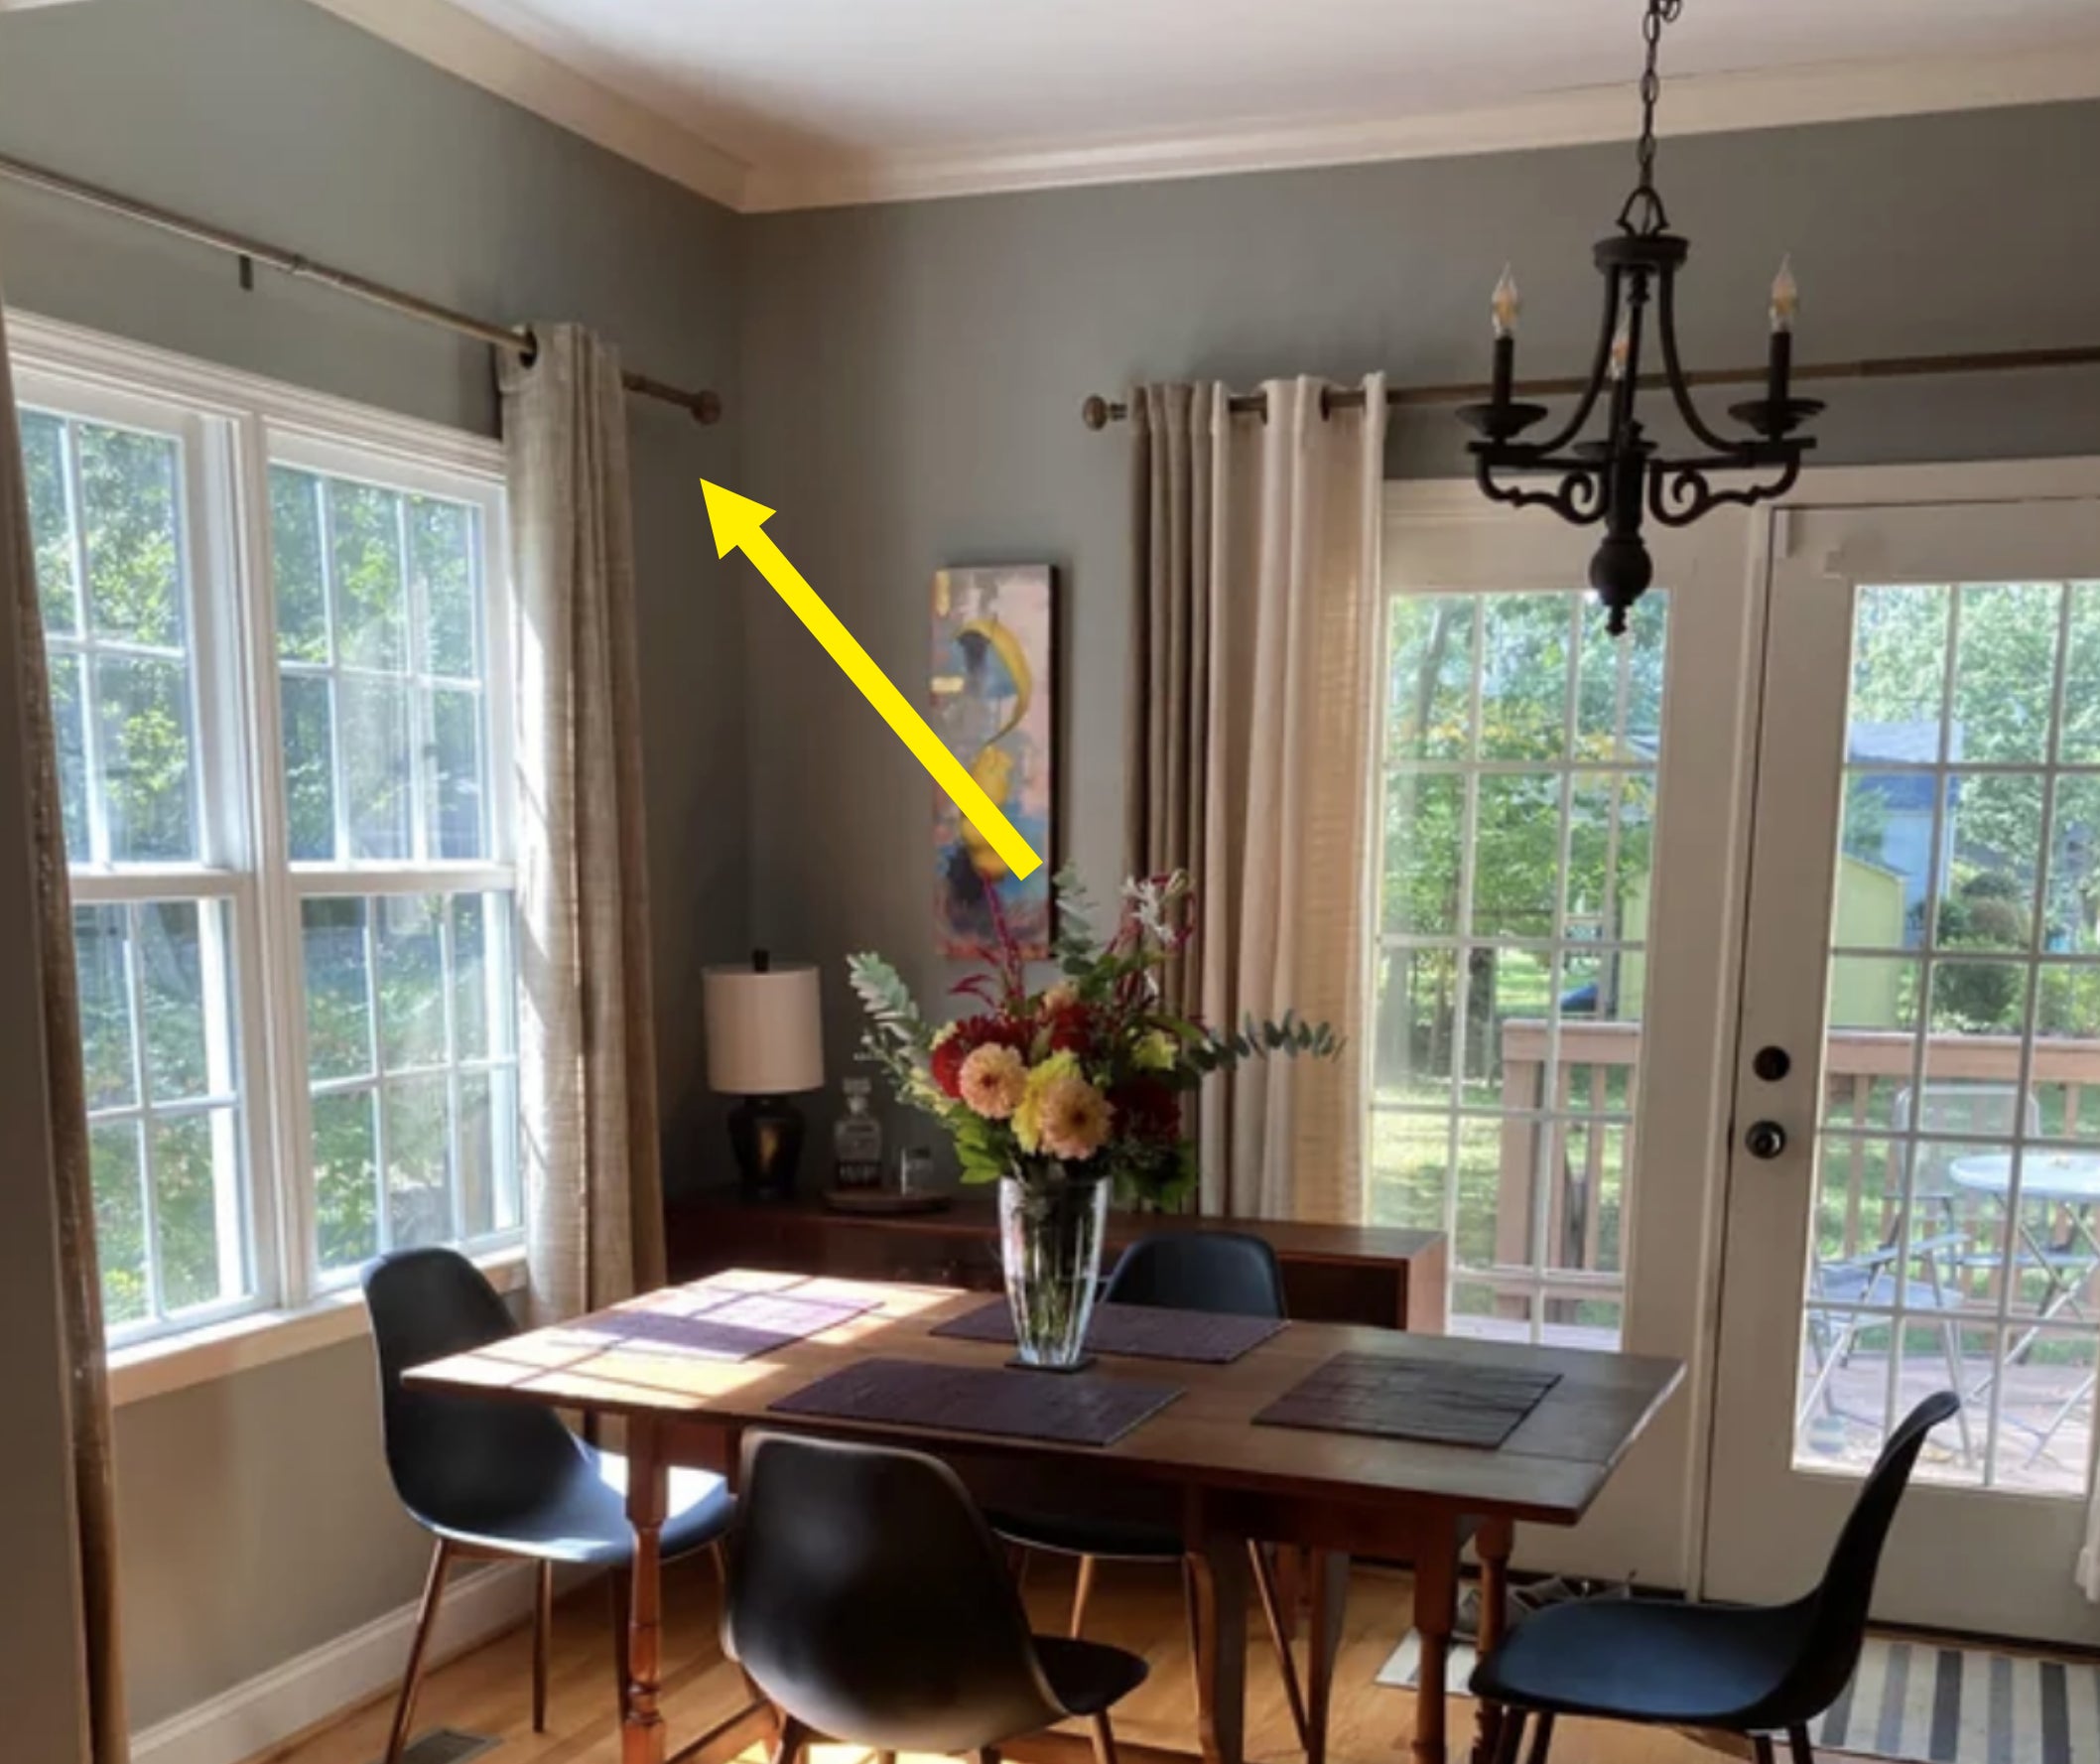 Arrow pointing to curtain rods that frame the window